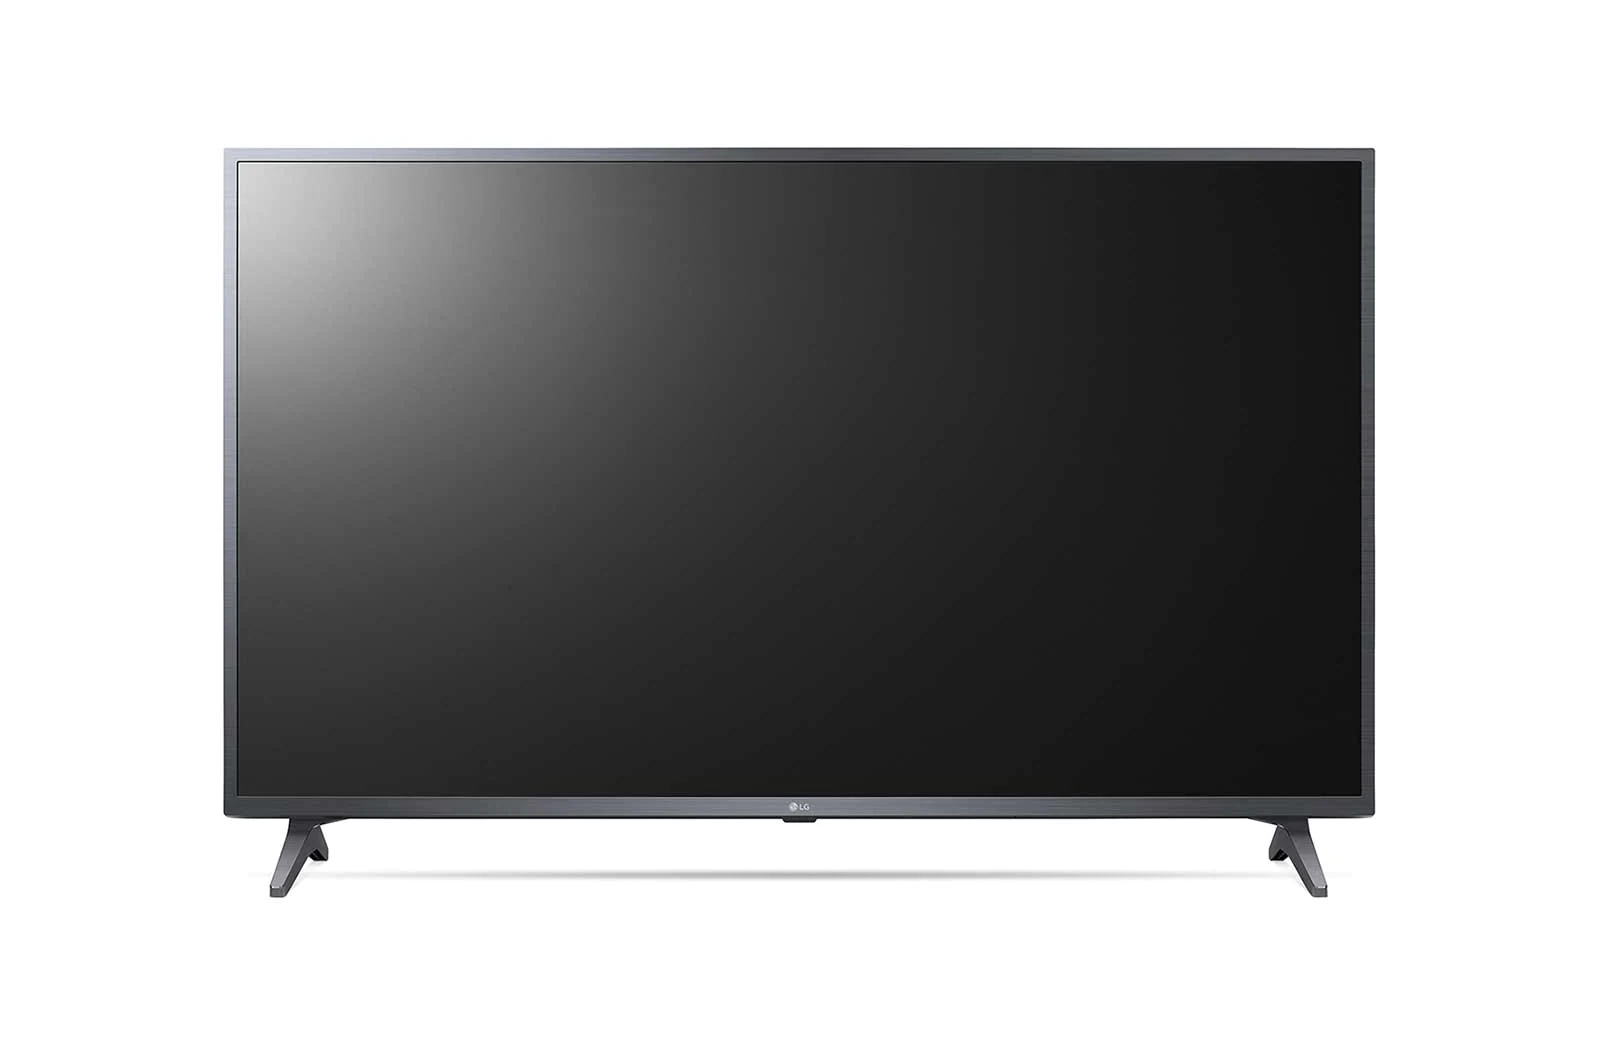 LG 50-inch UHD TV With Cinematic Screen 4K Active HDR Design